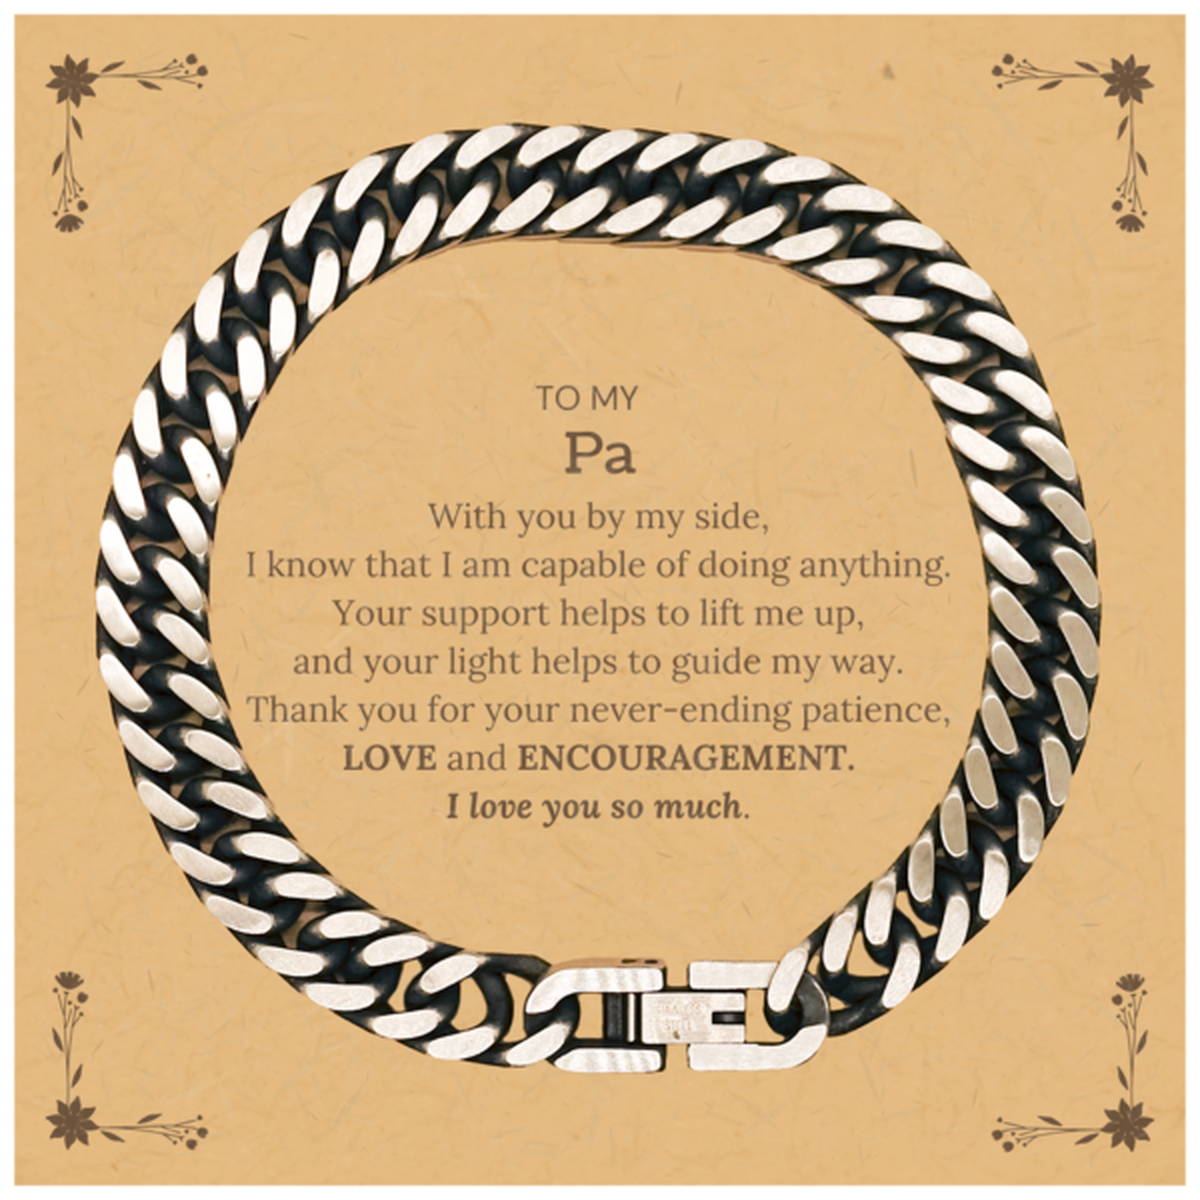 Appreciation Pa Cuban Link Chain Bracelet Gifts, To My Pa Birthday Christmas Wedding Keepsake Gifts for Pa With you by my side, I know that I am capable of doing anything. I love you so much